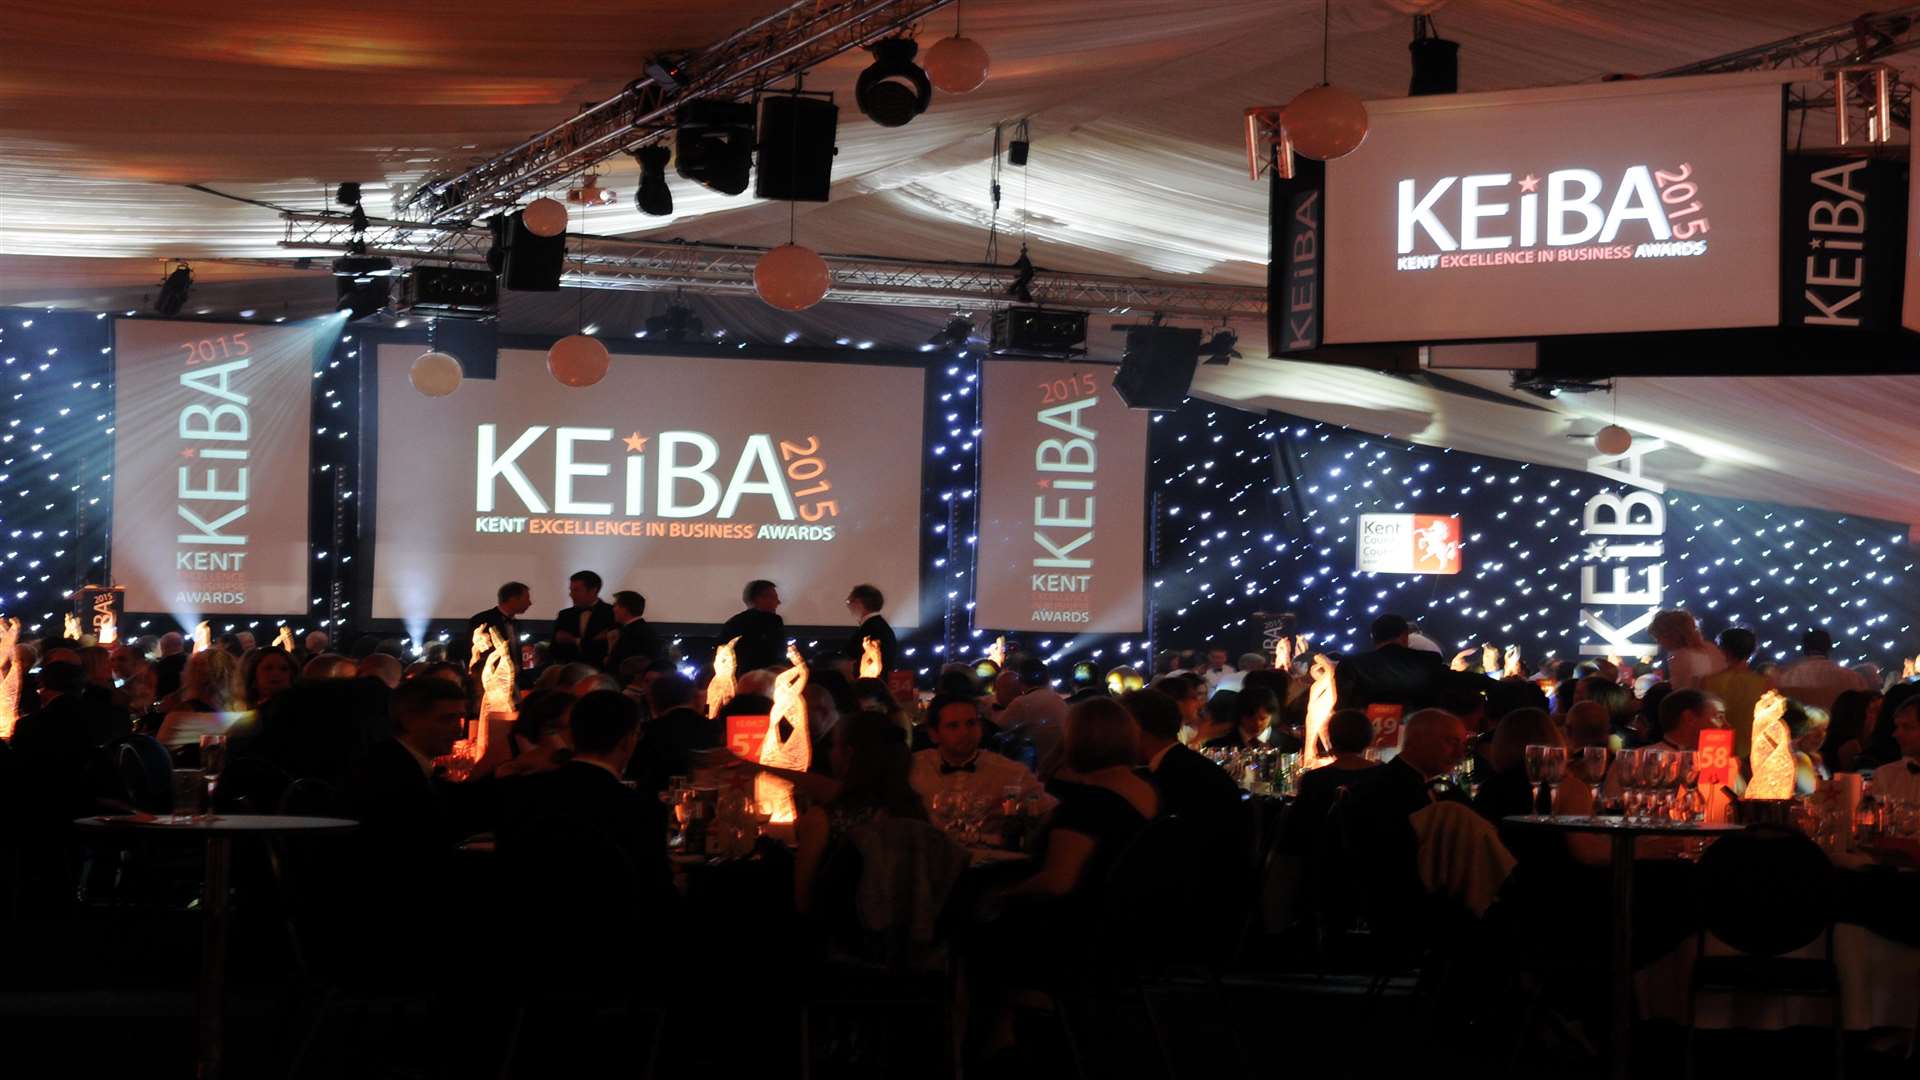 KEiBA is the most prestigious business awards in the county